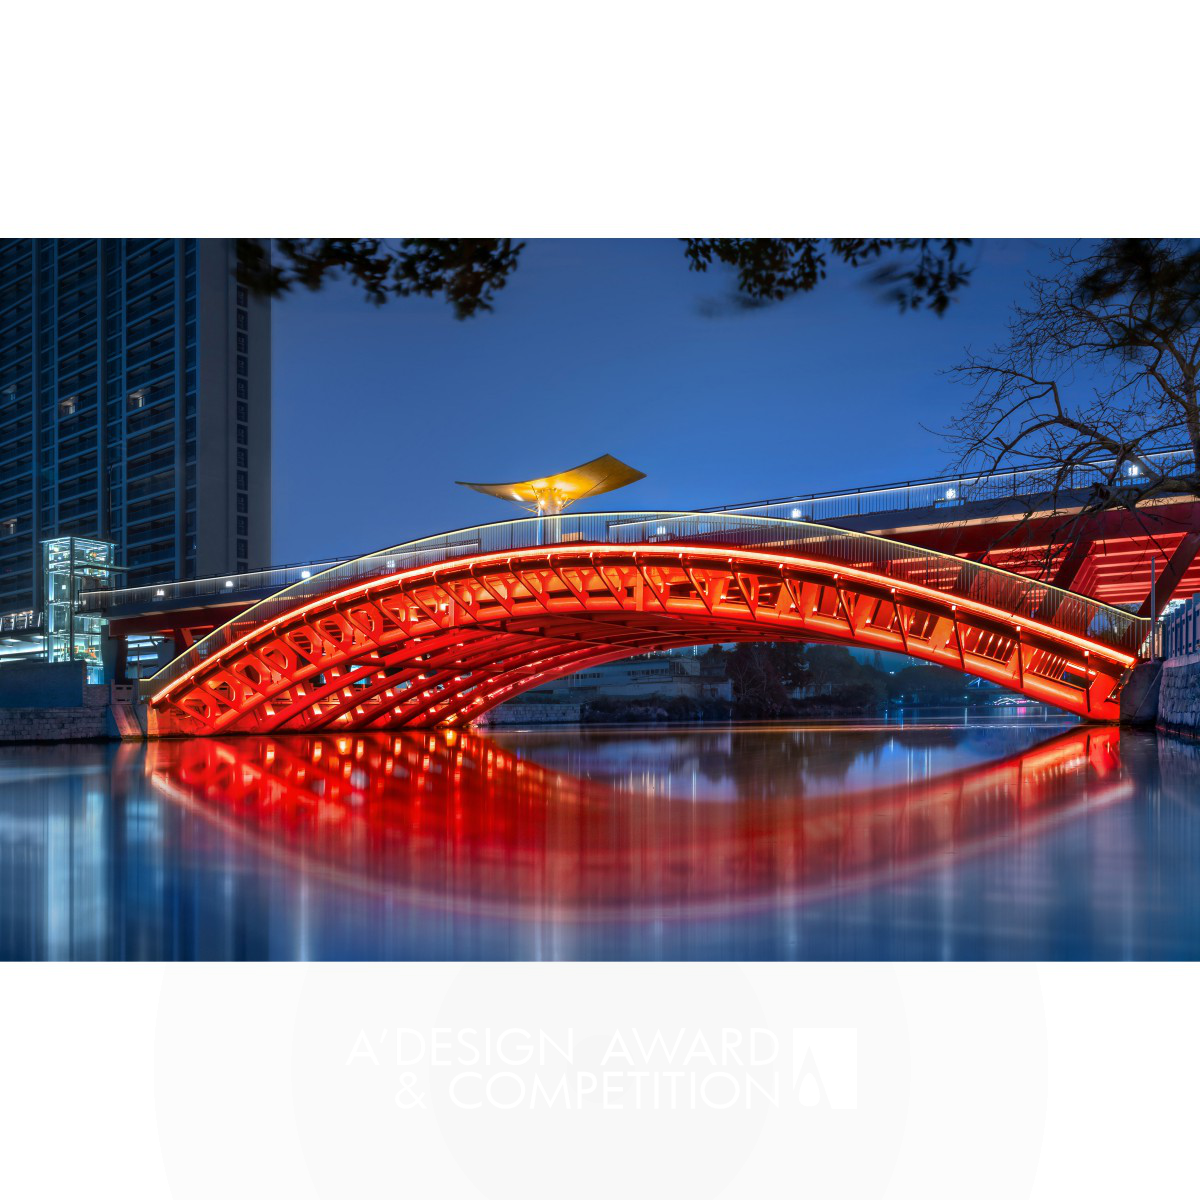 Lighting Design Institute of Wenzhou Design Assembly Company Ltd wins Silver at the prestigious A' Architectural Lighting Design Award with Longfang Bridge Nightscape Lighting Design.